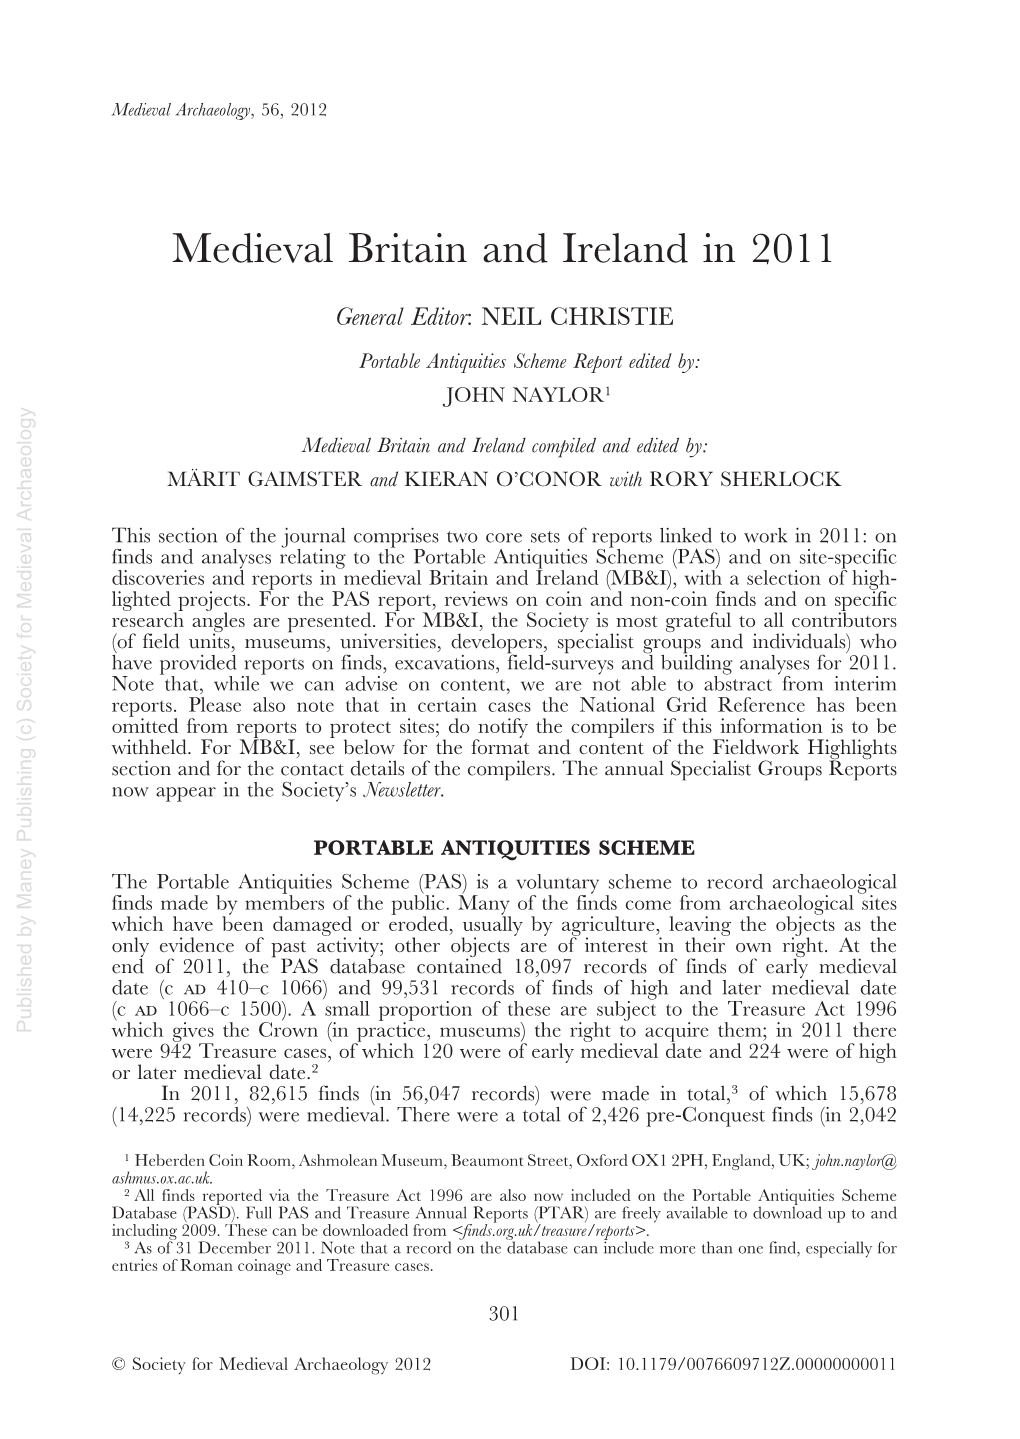 Medieval Britain and Ireland in 2011